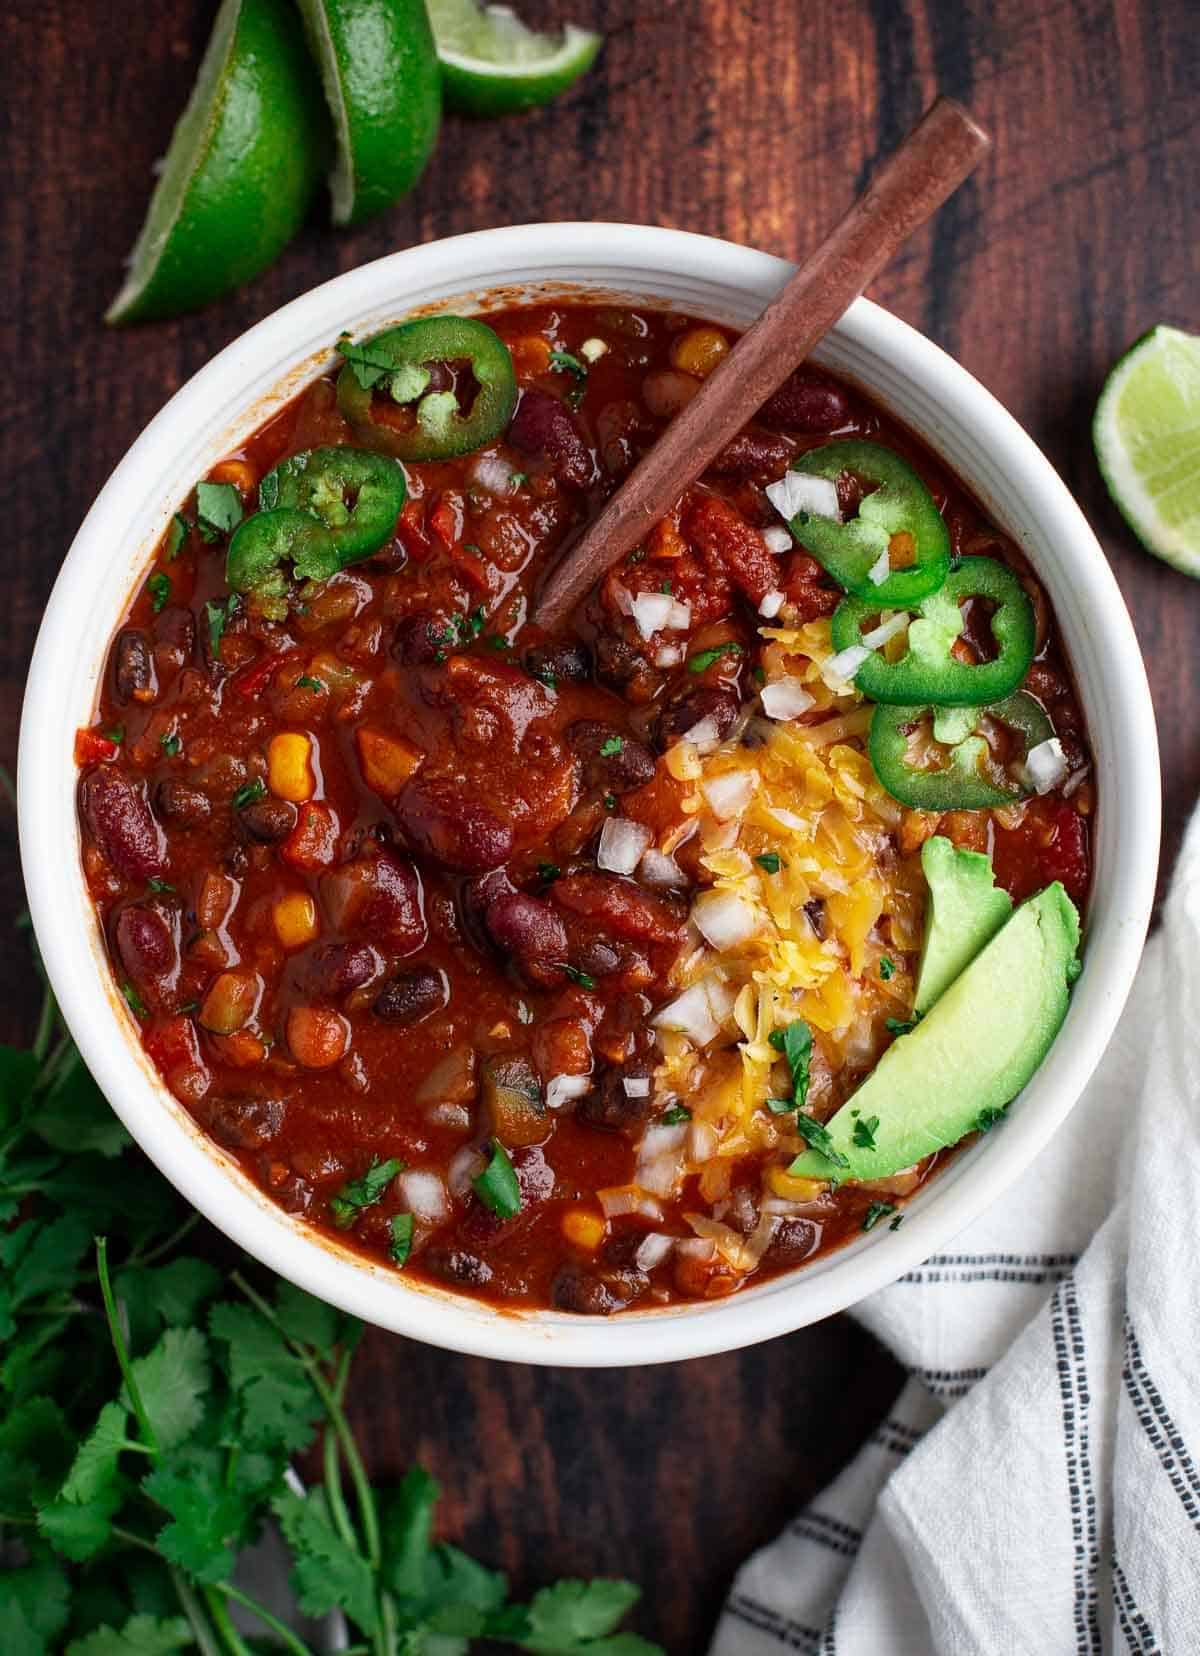 Vegetarian chili with toppings in a bowl.